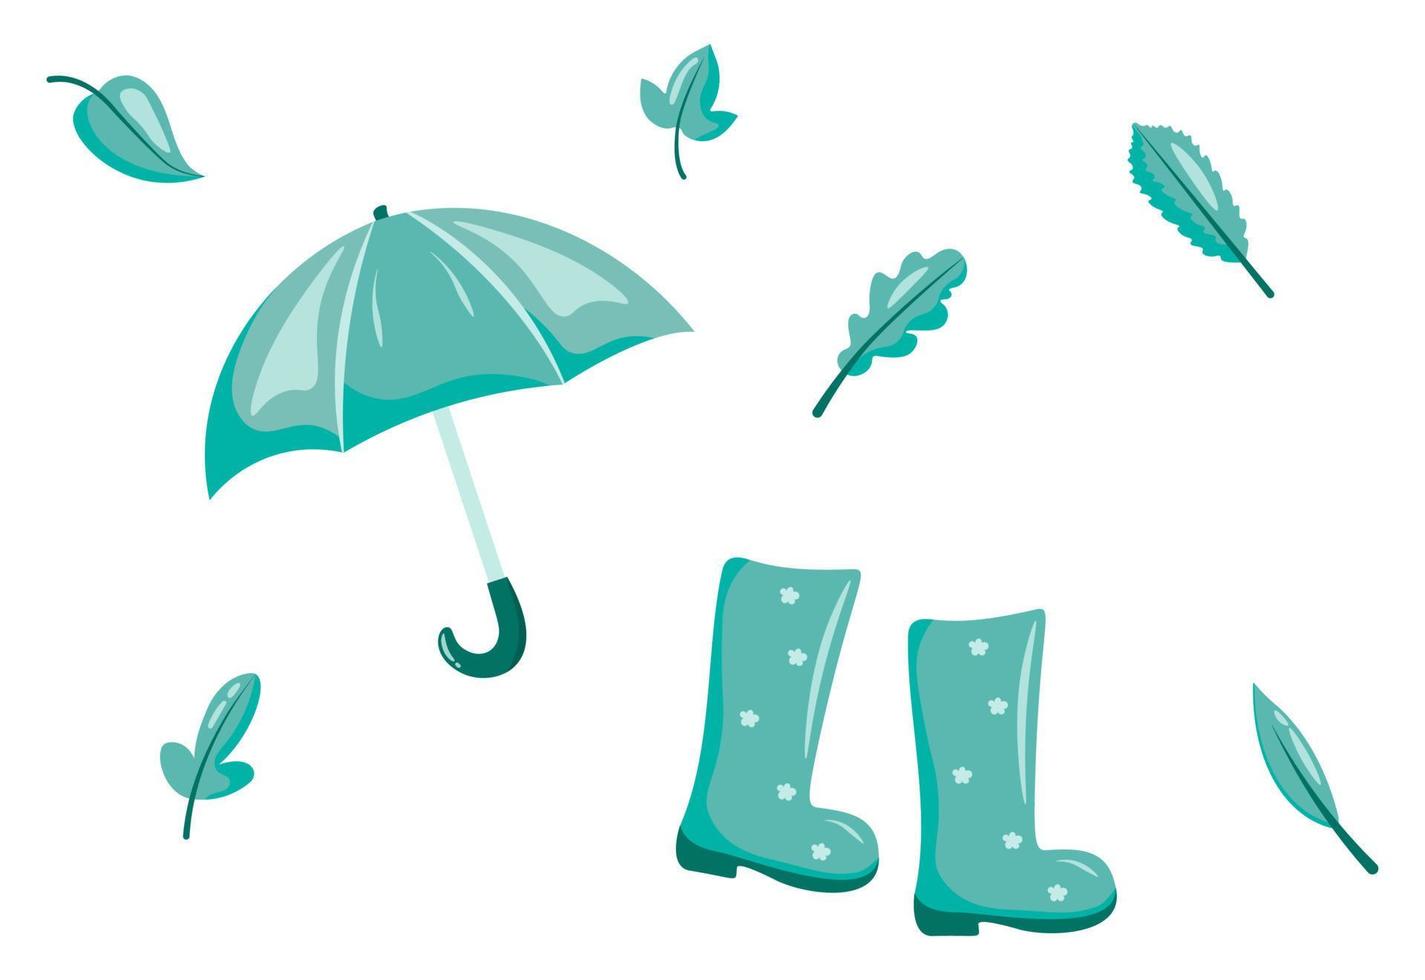 Cute rubber boots and umbrellas with leaves set on white background. Flat design style and autumn accessory concept fashion sign vector illustration.